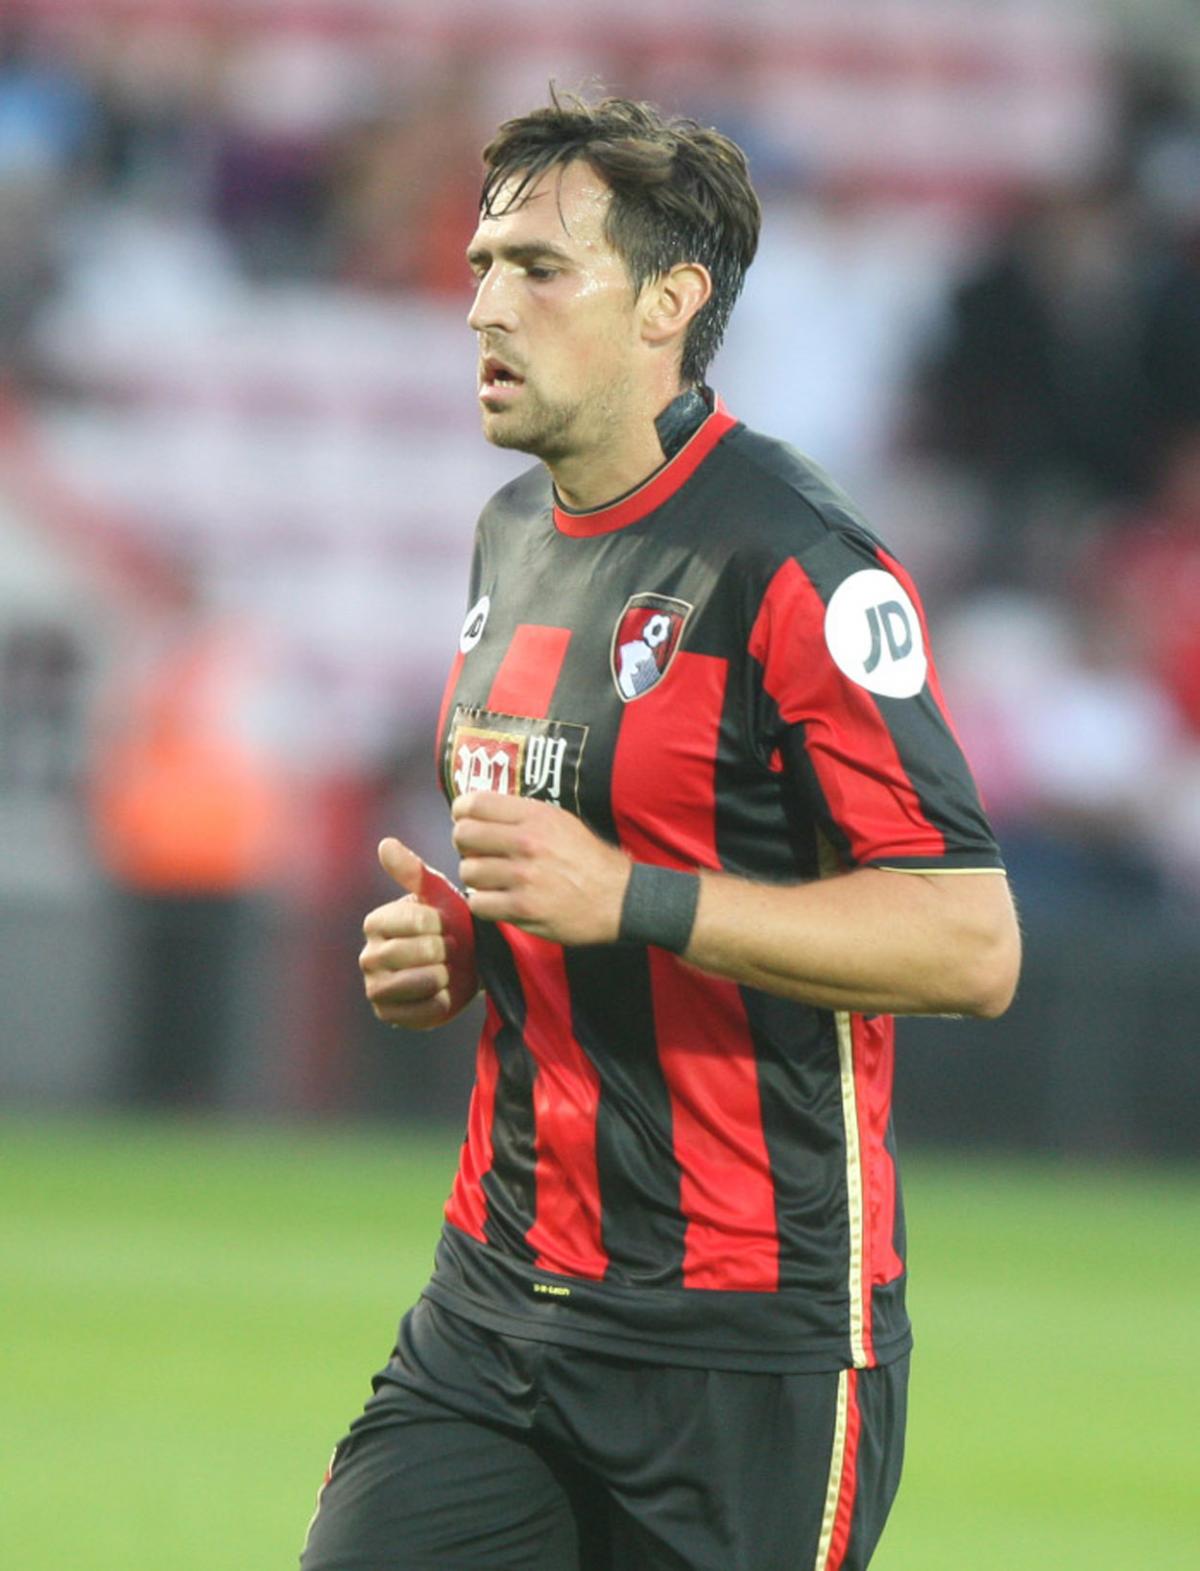 All the pictures from AFC Bournemouth v Cardiff City at the Vitality Stadium on July 31, 2015 by Mick Cunningham 